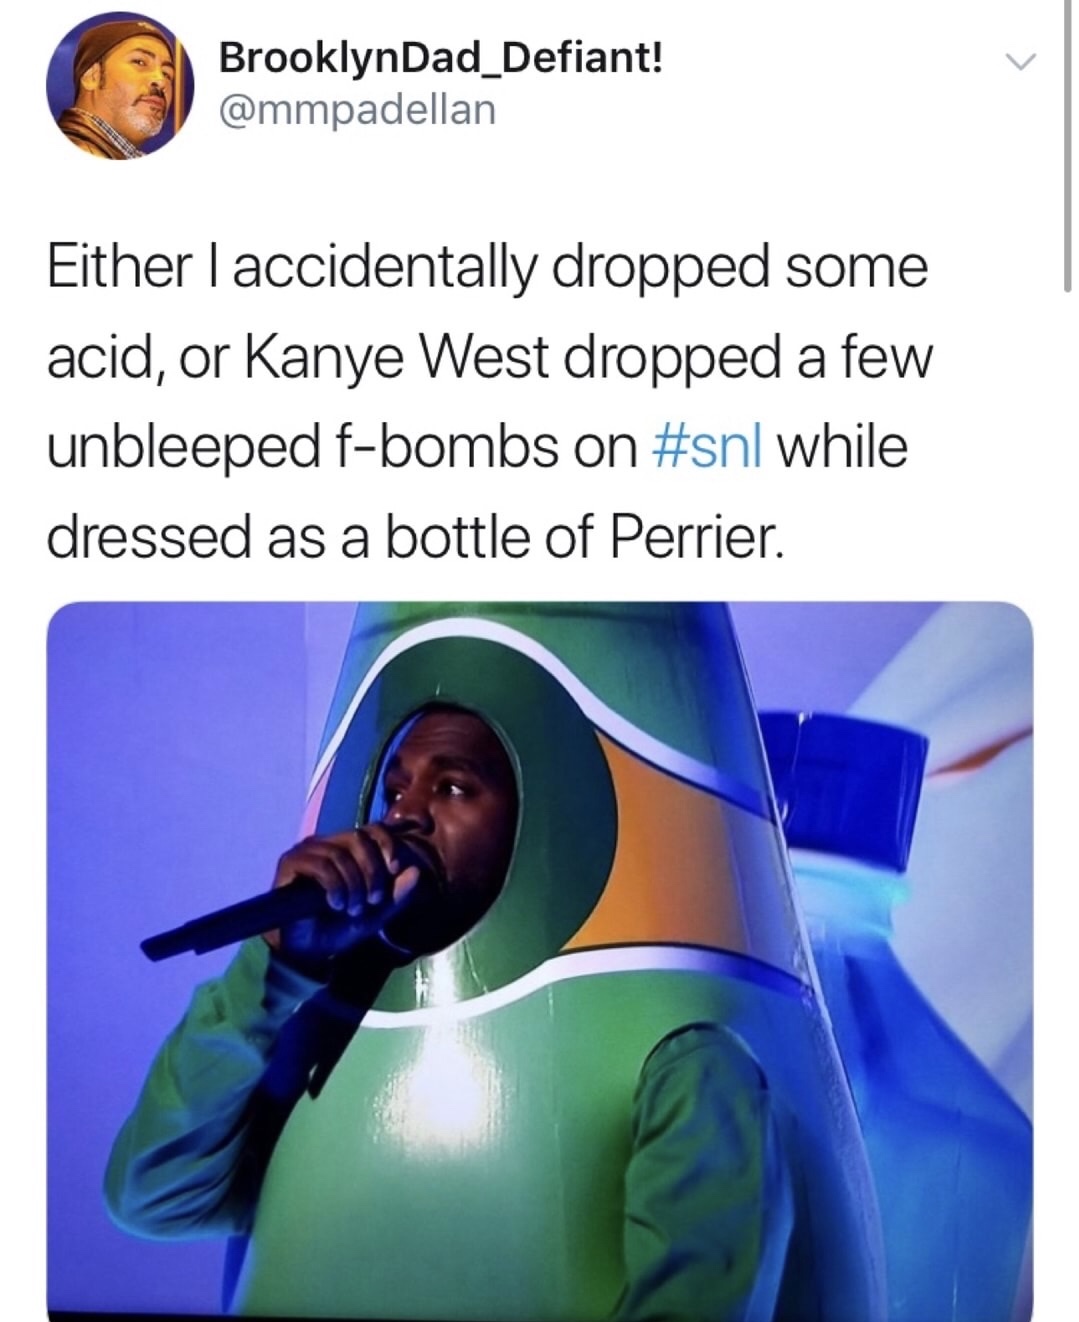 Kanye meme about taking acid and seeing him in a bottle suite